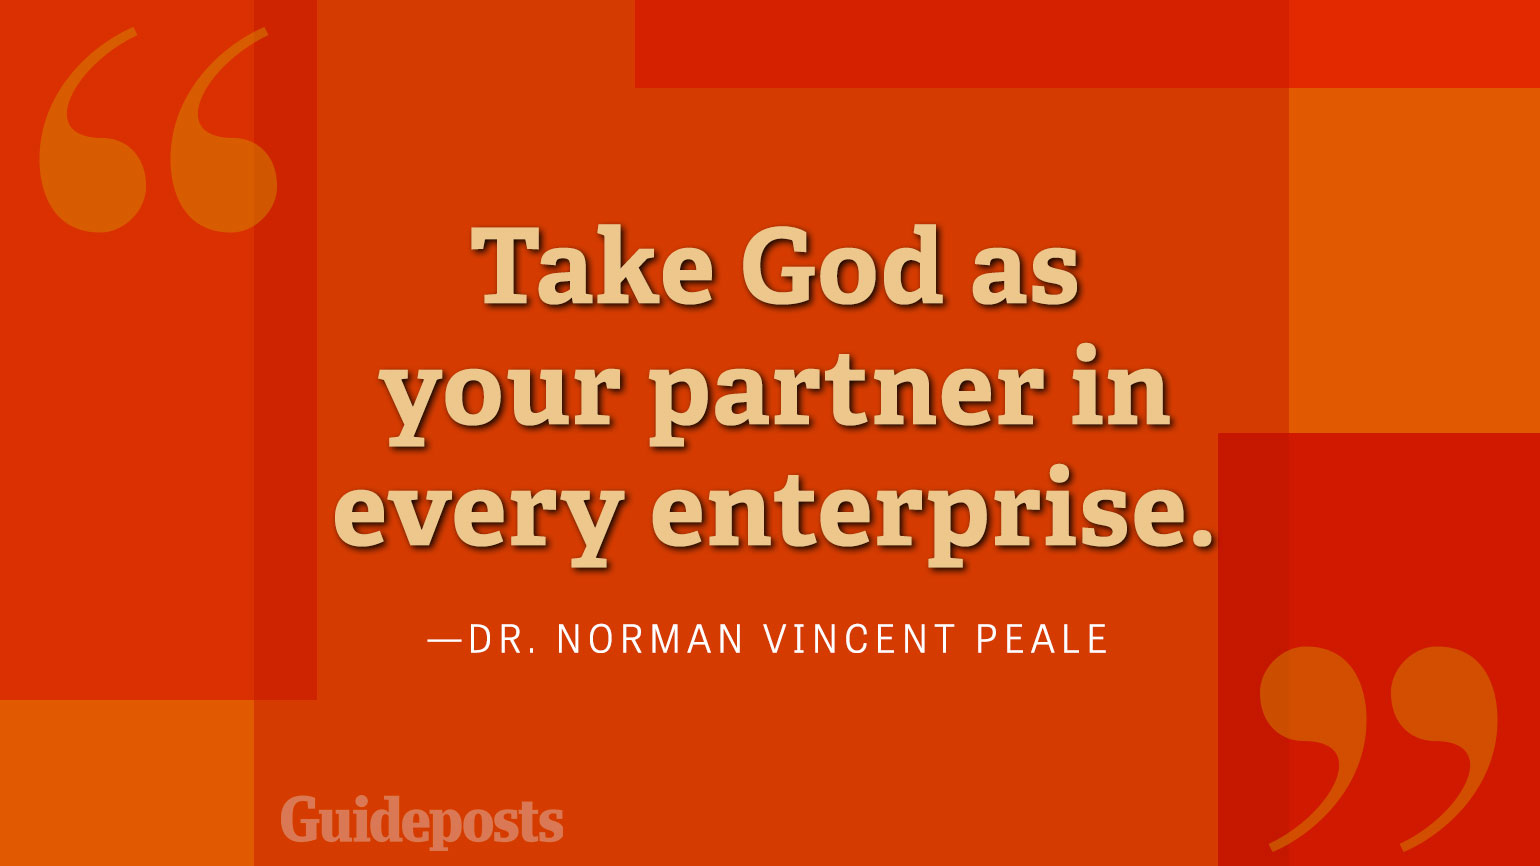 Take God as your partner in every enterprise.